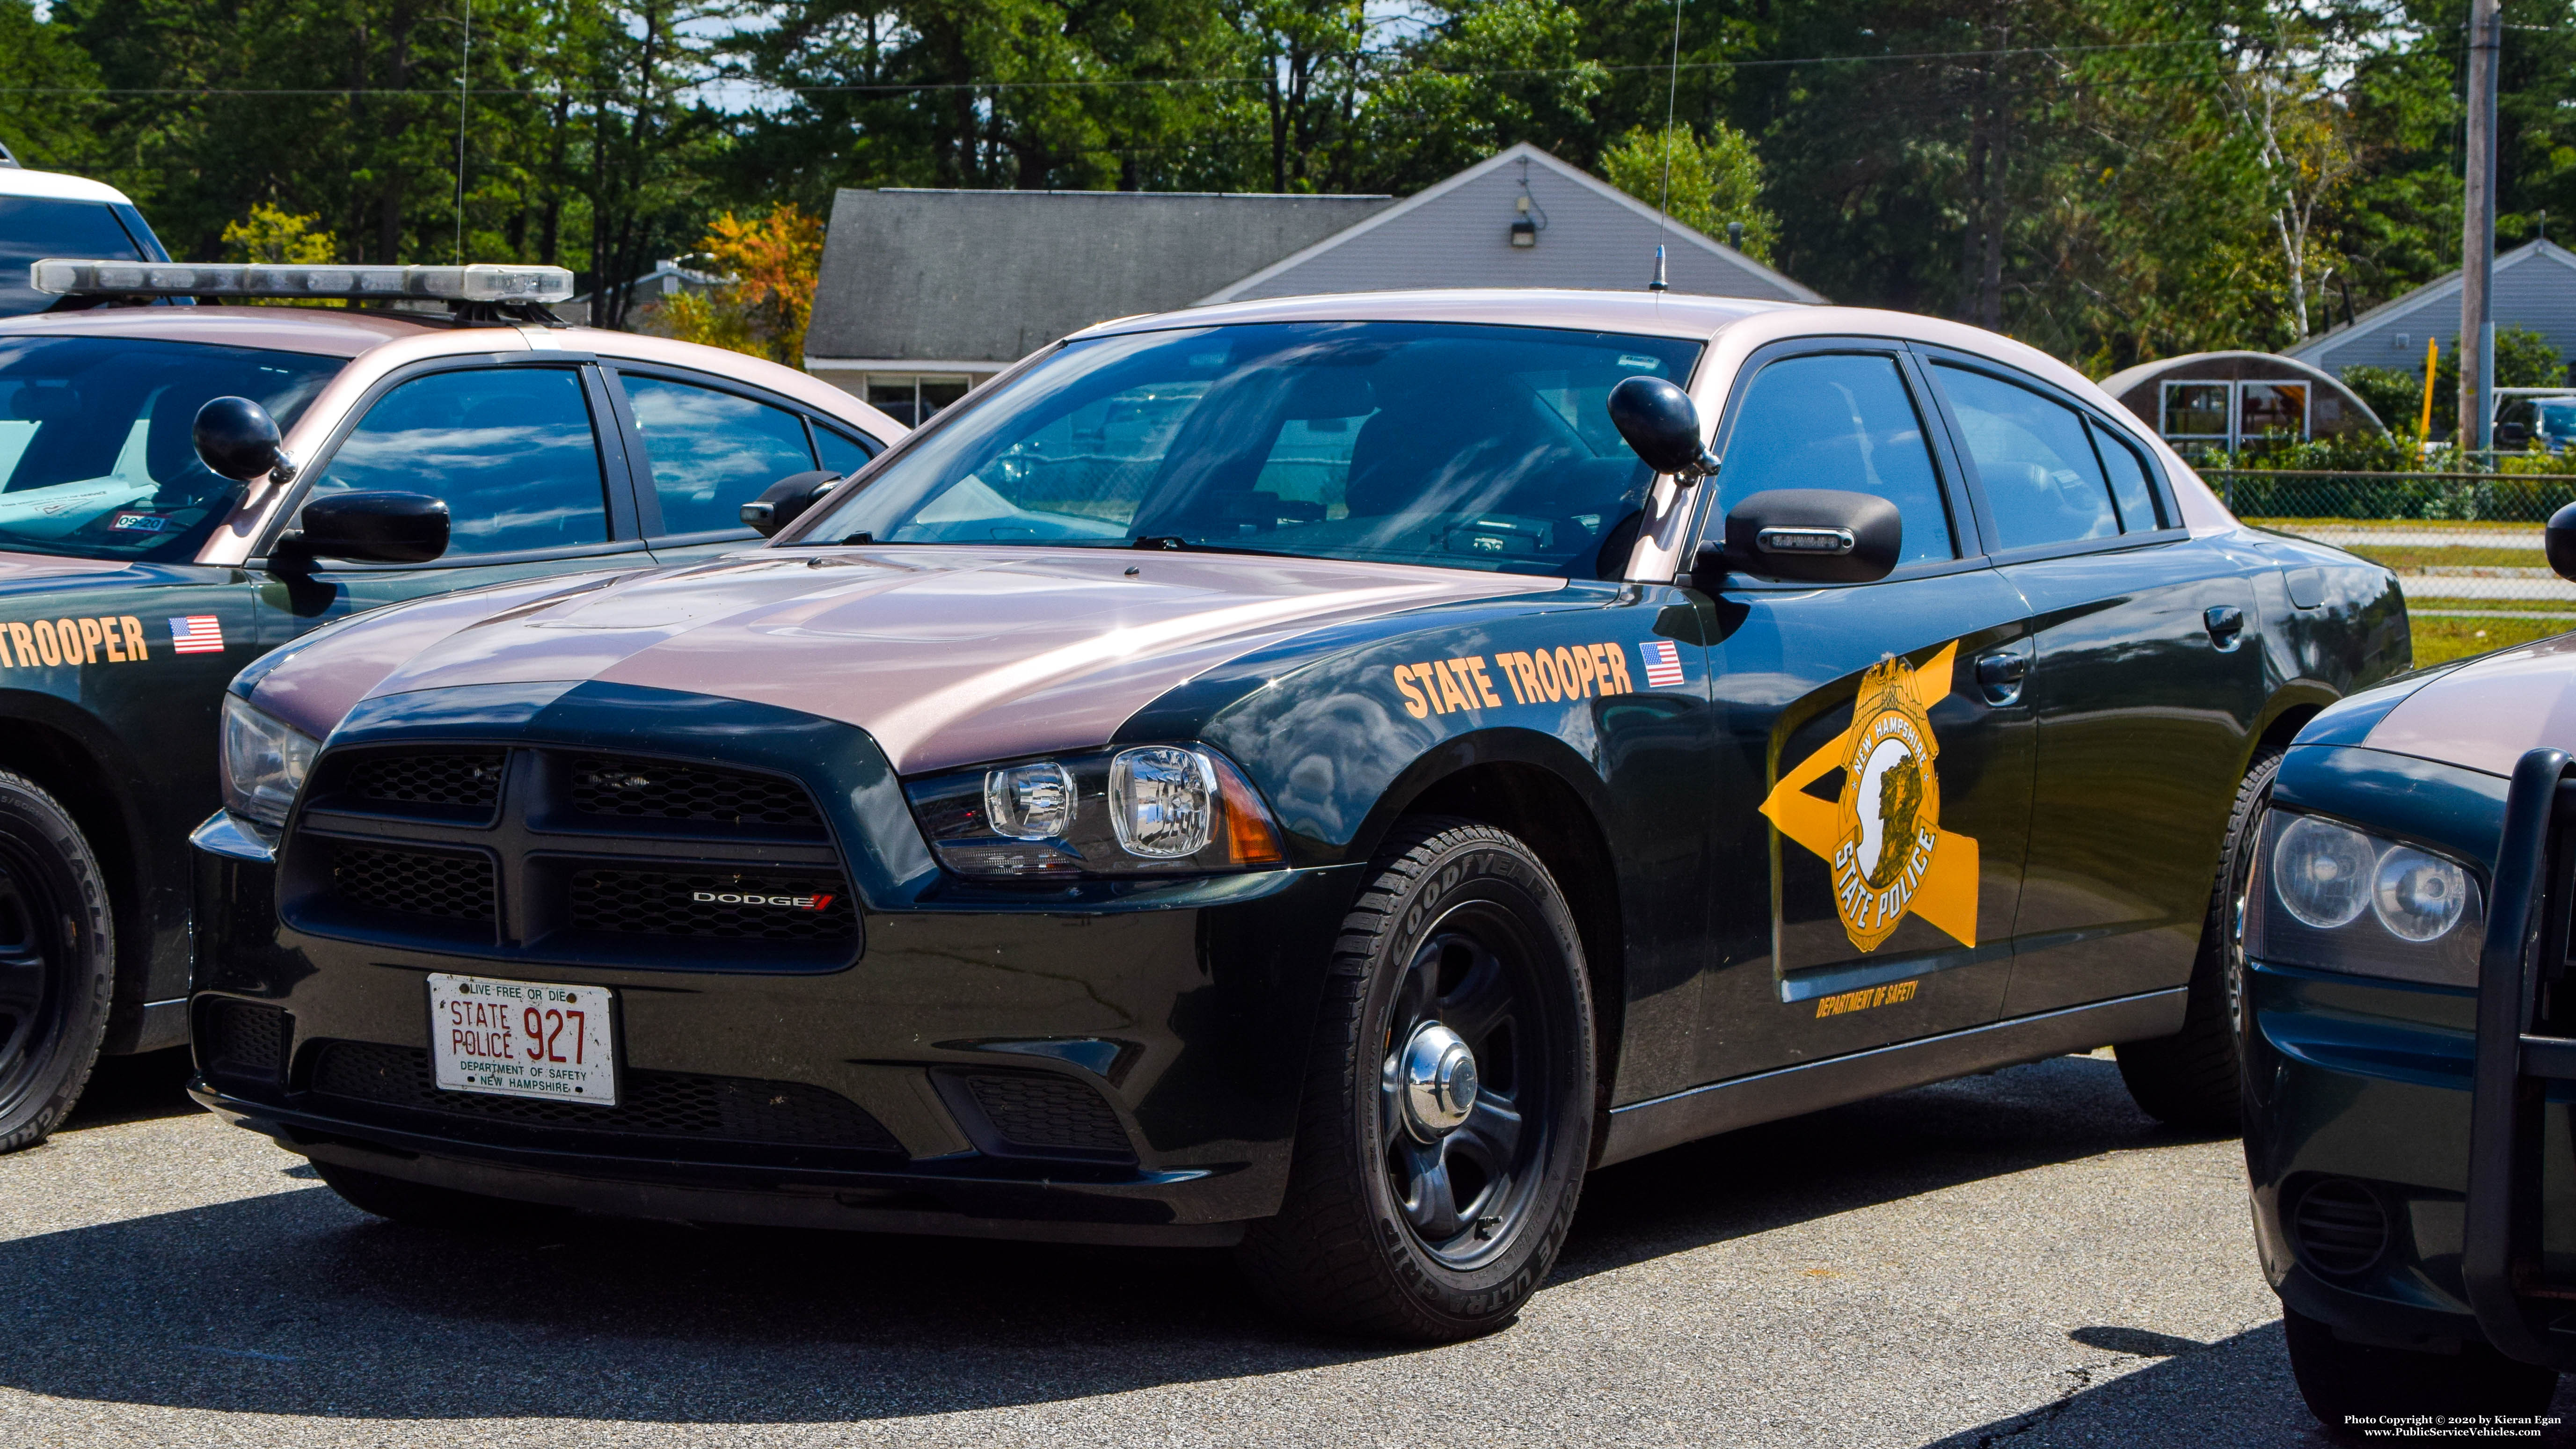 A photo  of New Hampshire State Police
            Cruiser 927, a 2011-2014 Dodge Charger             taken by Kieran Egan